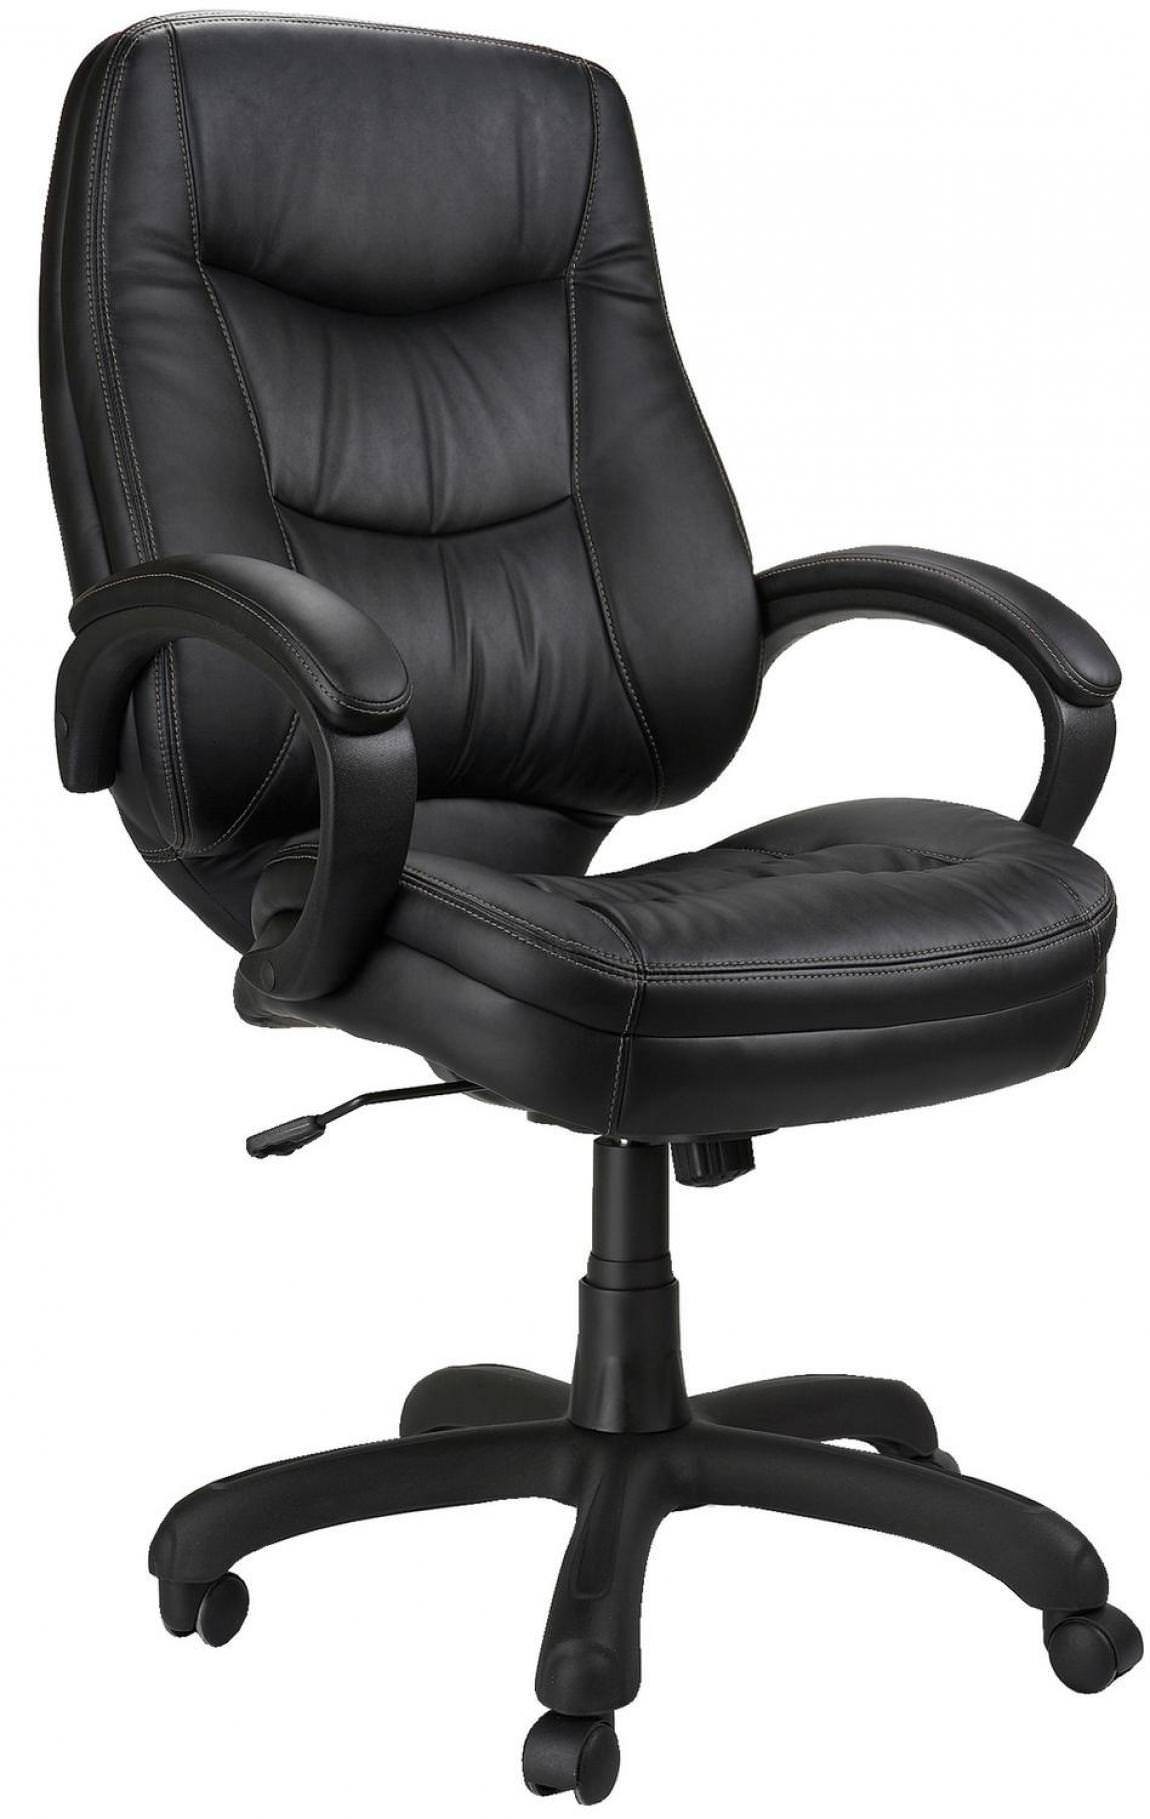 Black Executive Office Chair with Arms